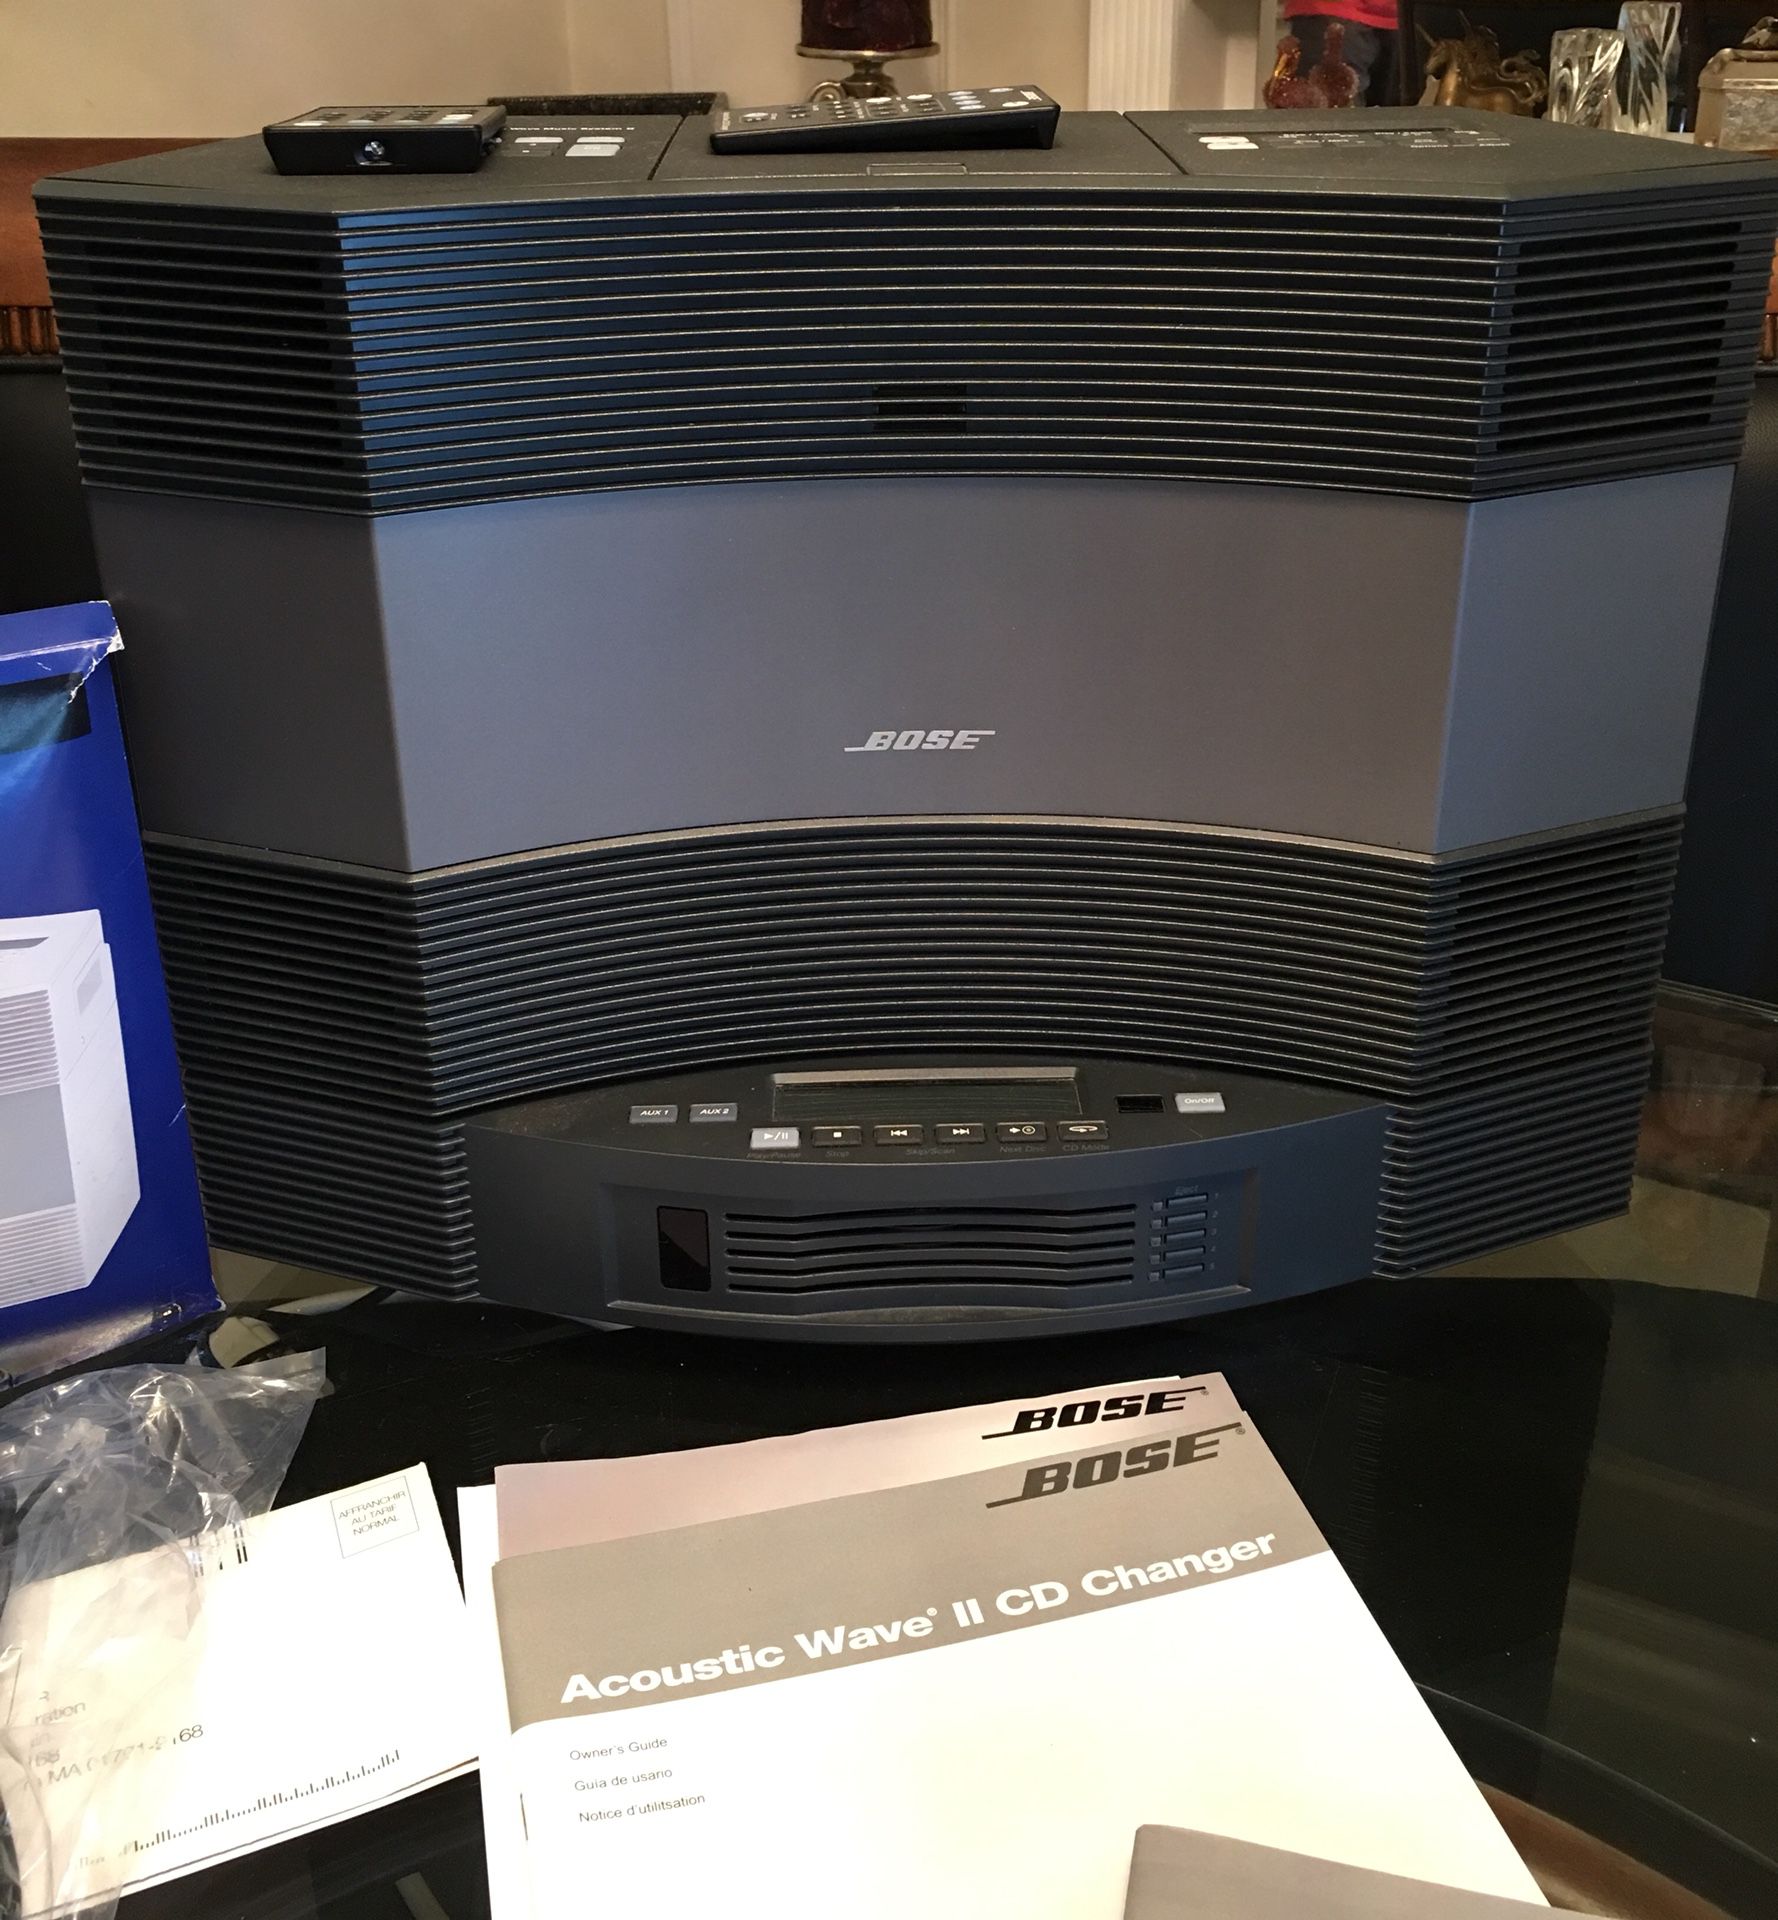 BOSE Acoustic Wave II music system with CD changer and IPod 